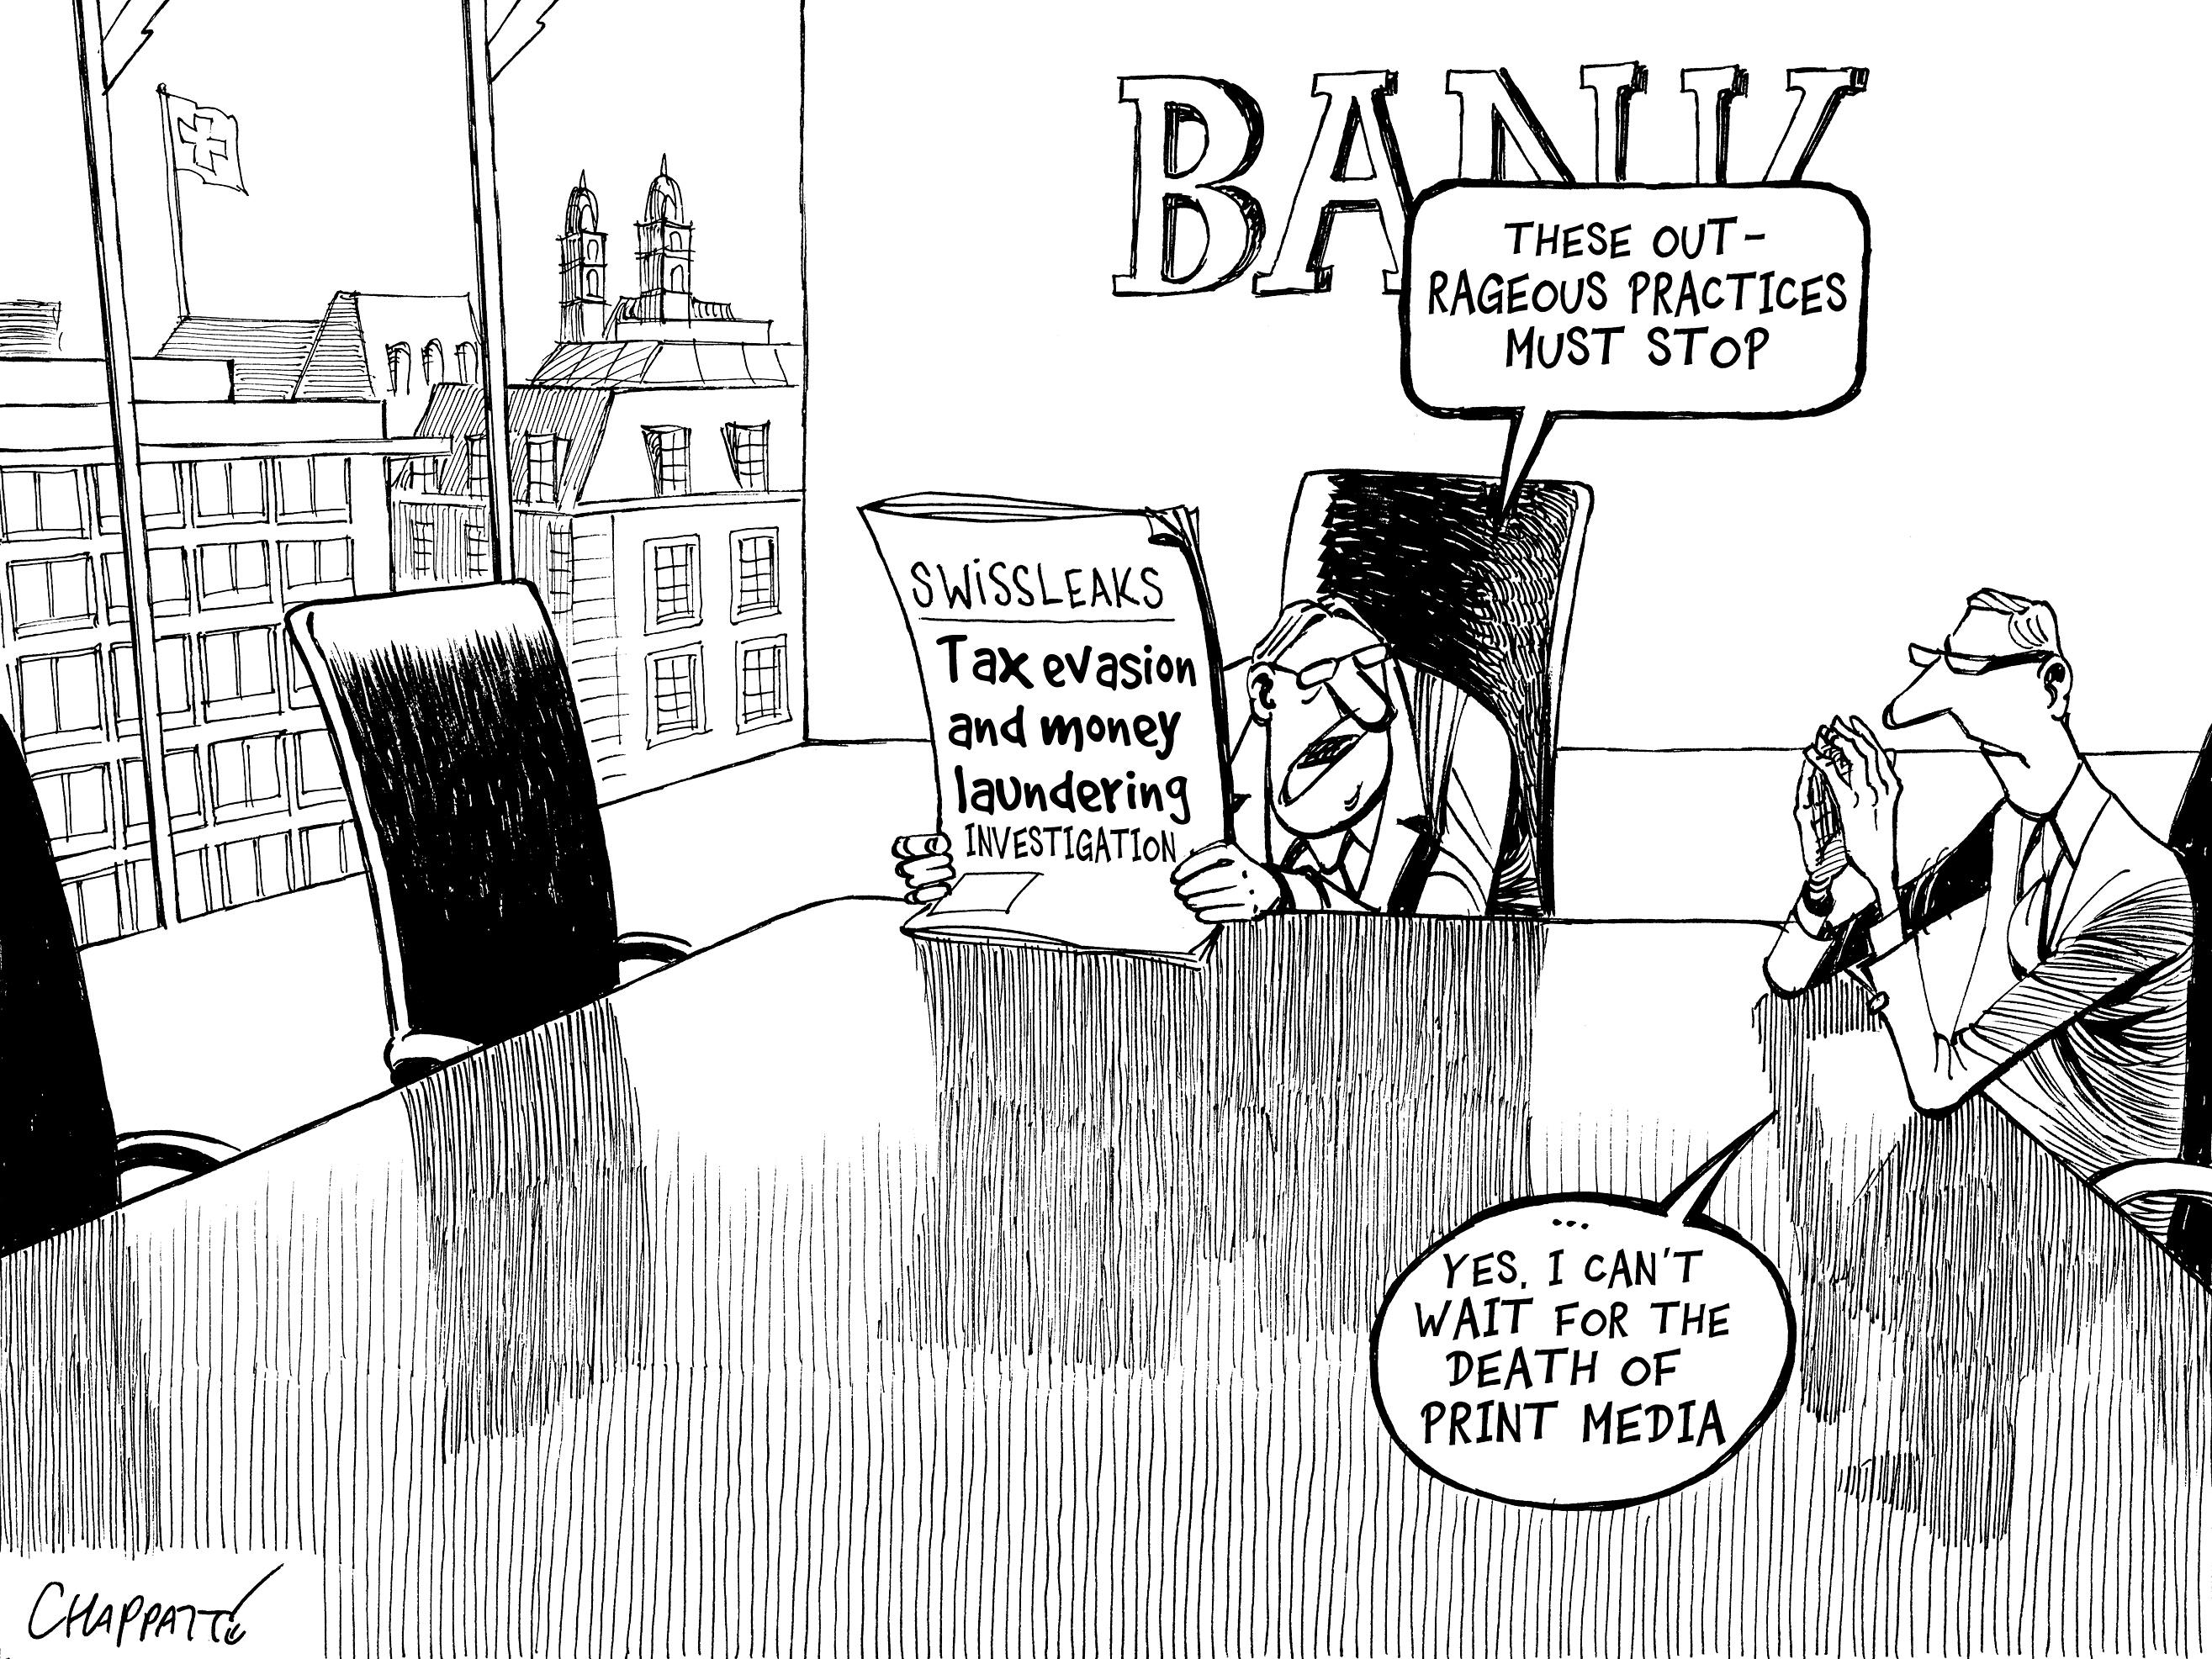 Revelations on Swiss banking practices